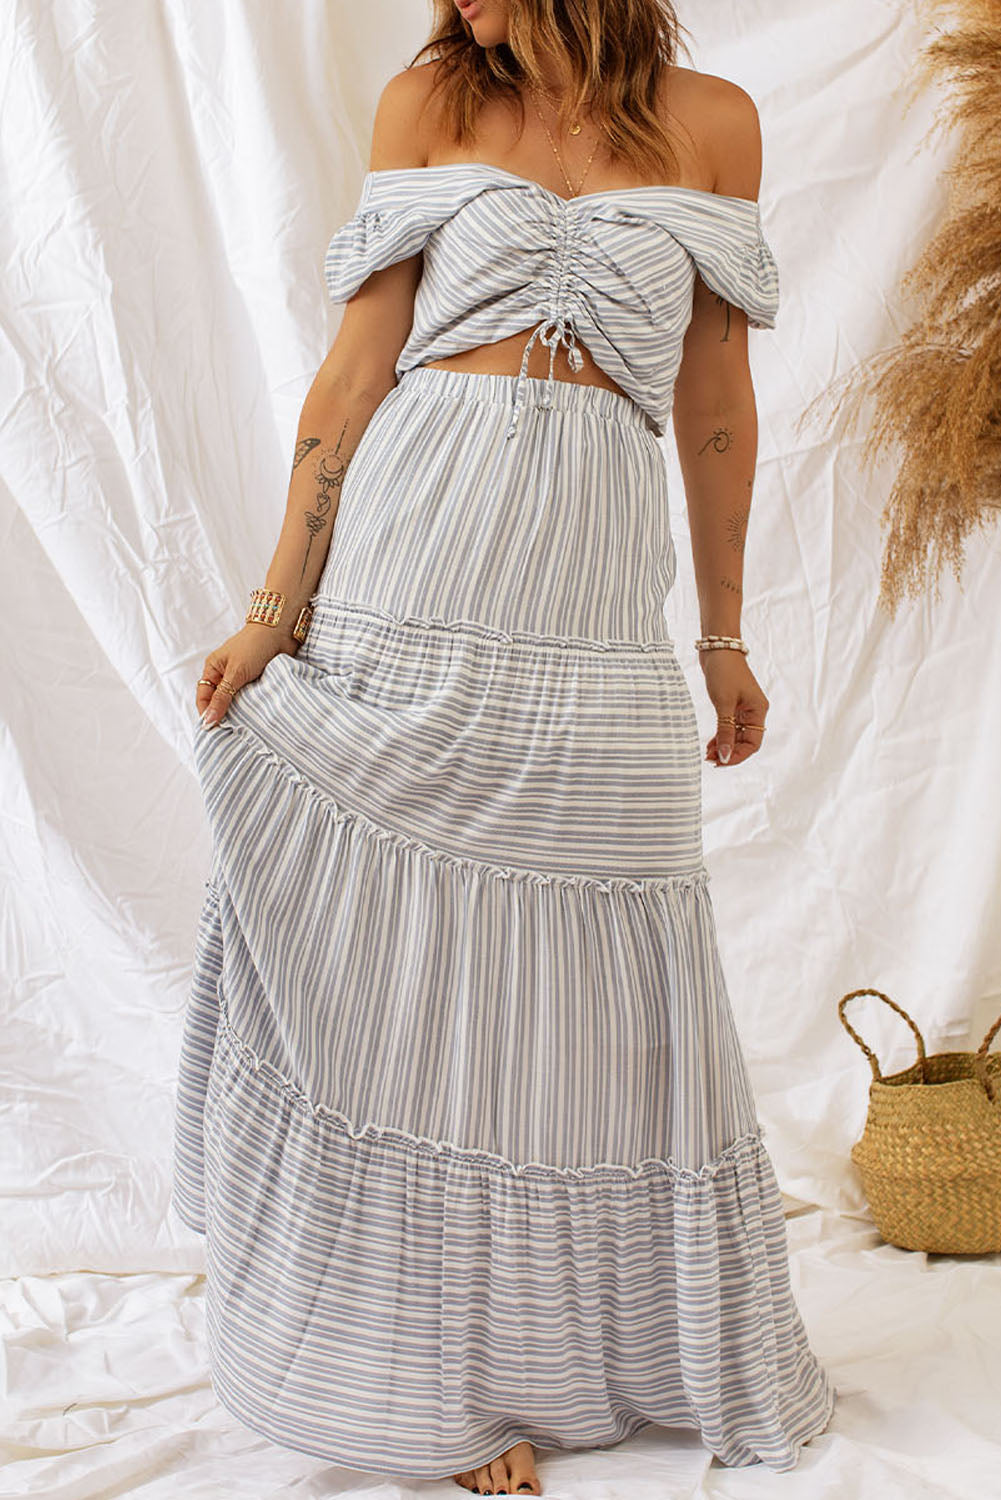 Striped Print Lace-up Crop Top Tiered Ruffle Maxi Skirt Set